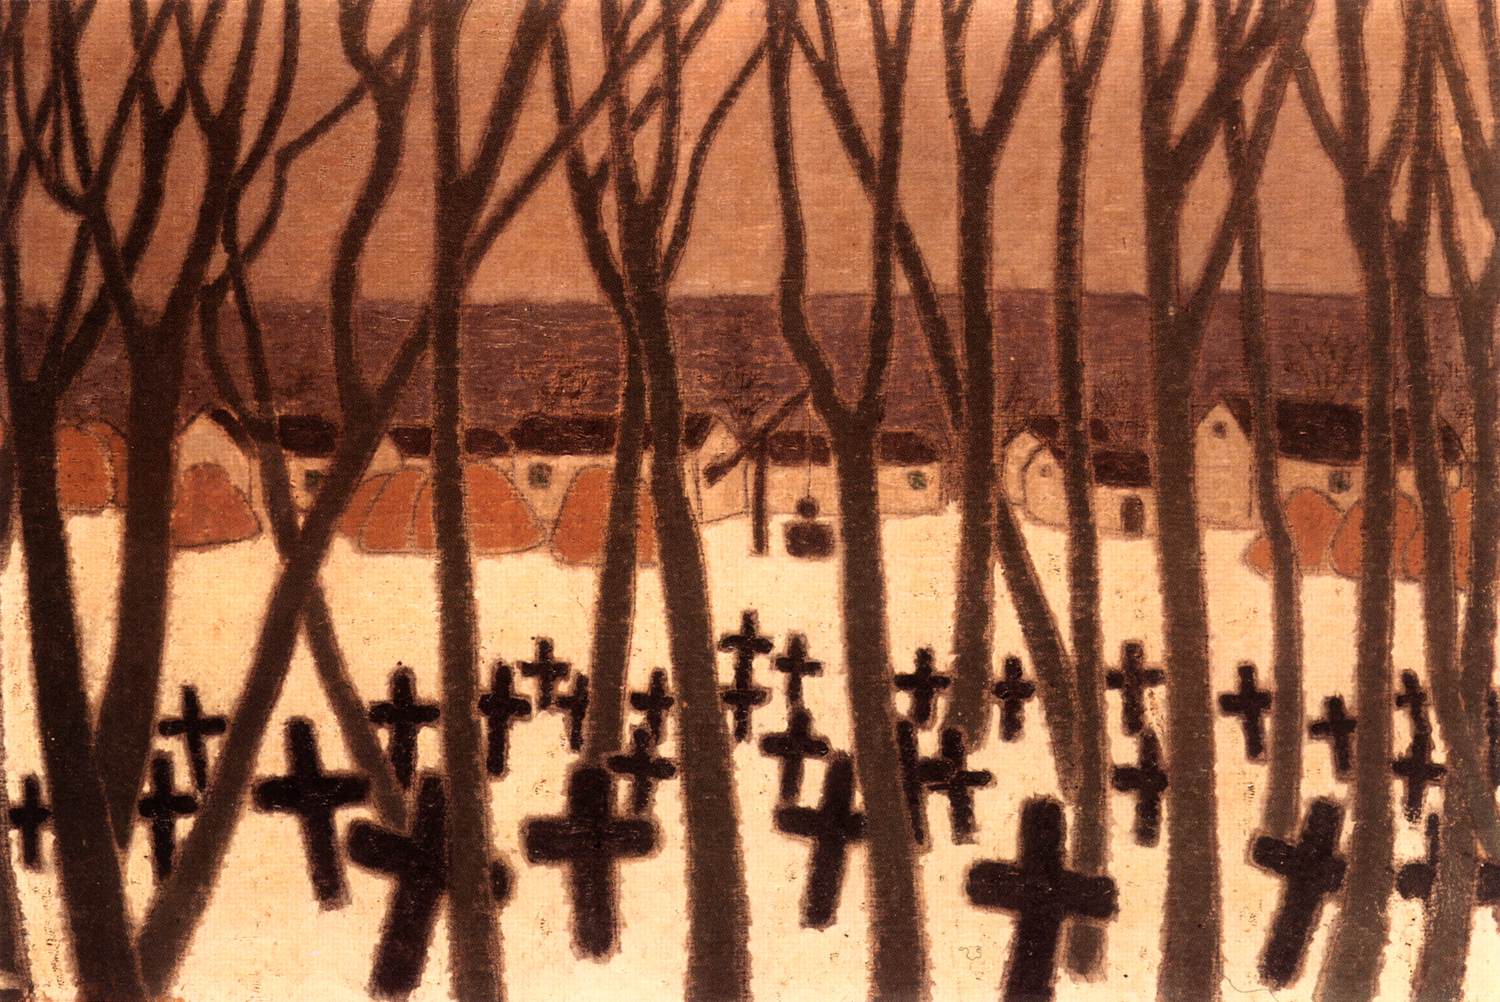 Cemetery on the Great Plain